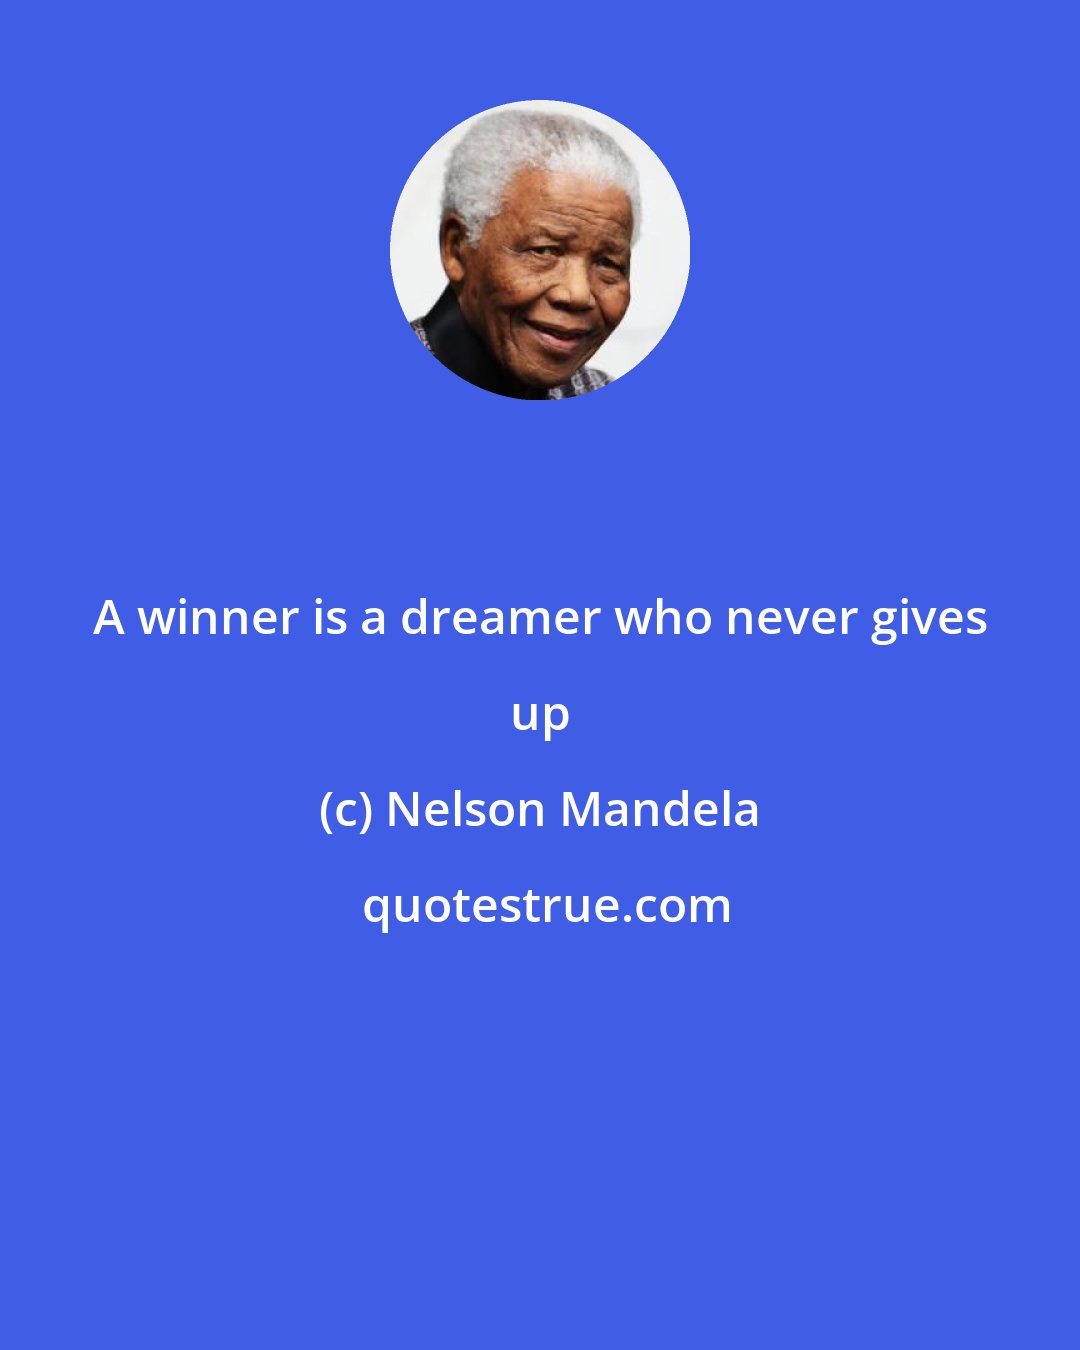 Nelson Mandela: A winner is a dreamer who never gives up